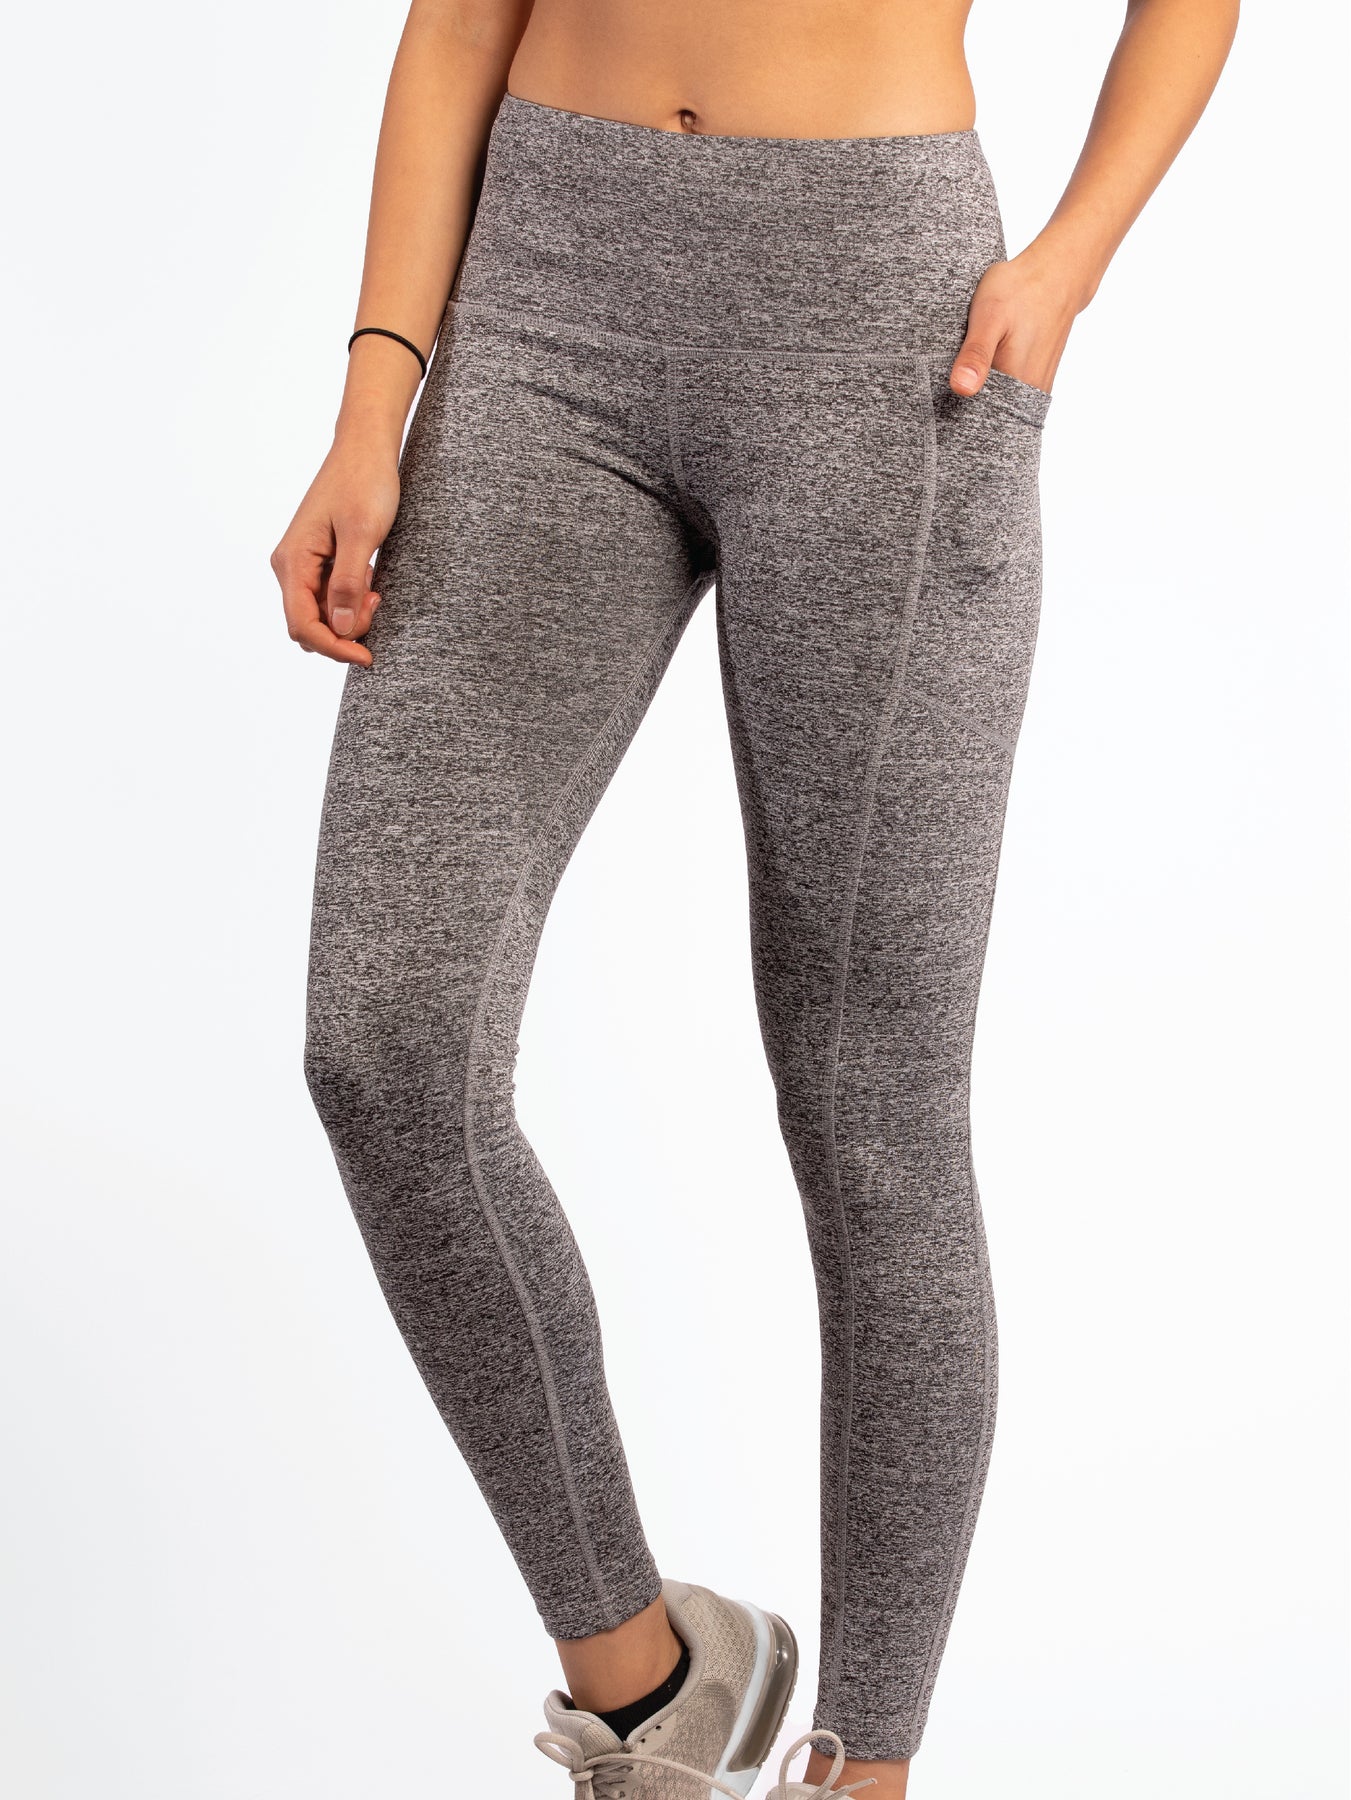 NWT pack of three New Mix premium fleece-lined leggings. High